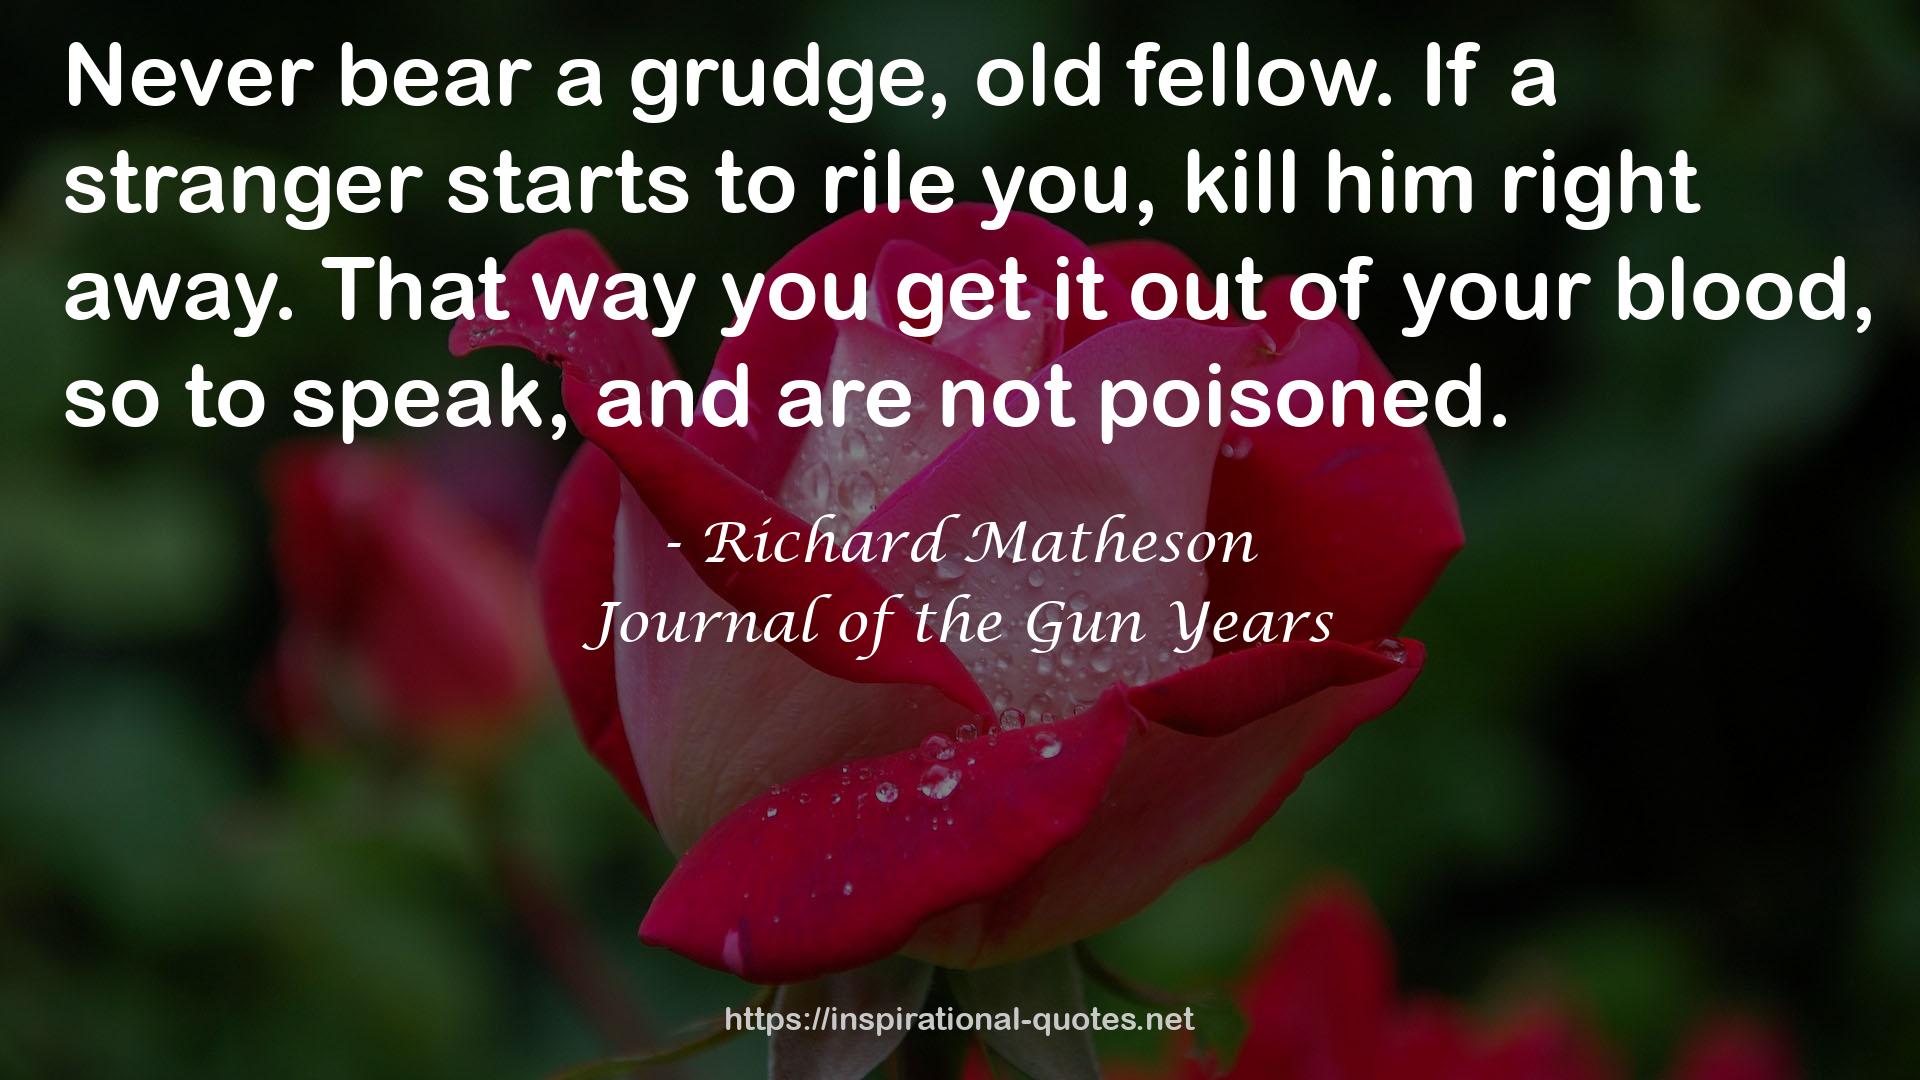 Journal of the Gun Years QUOTES